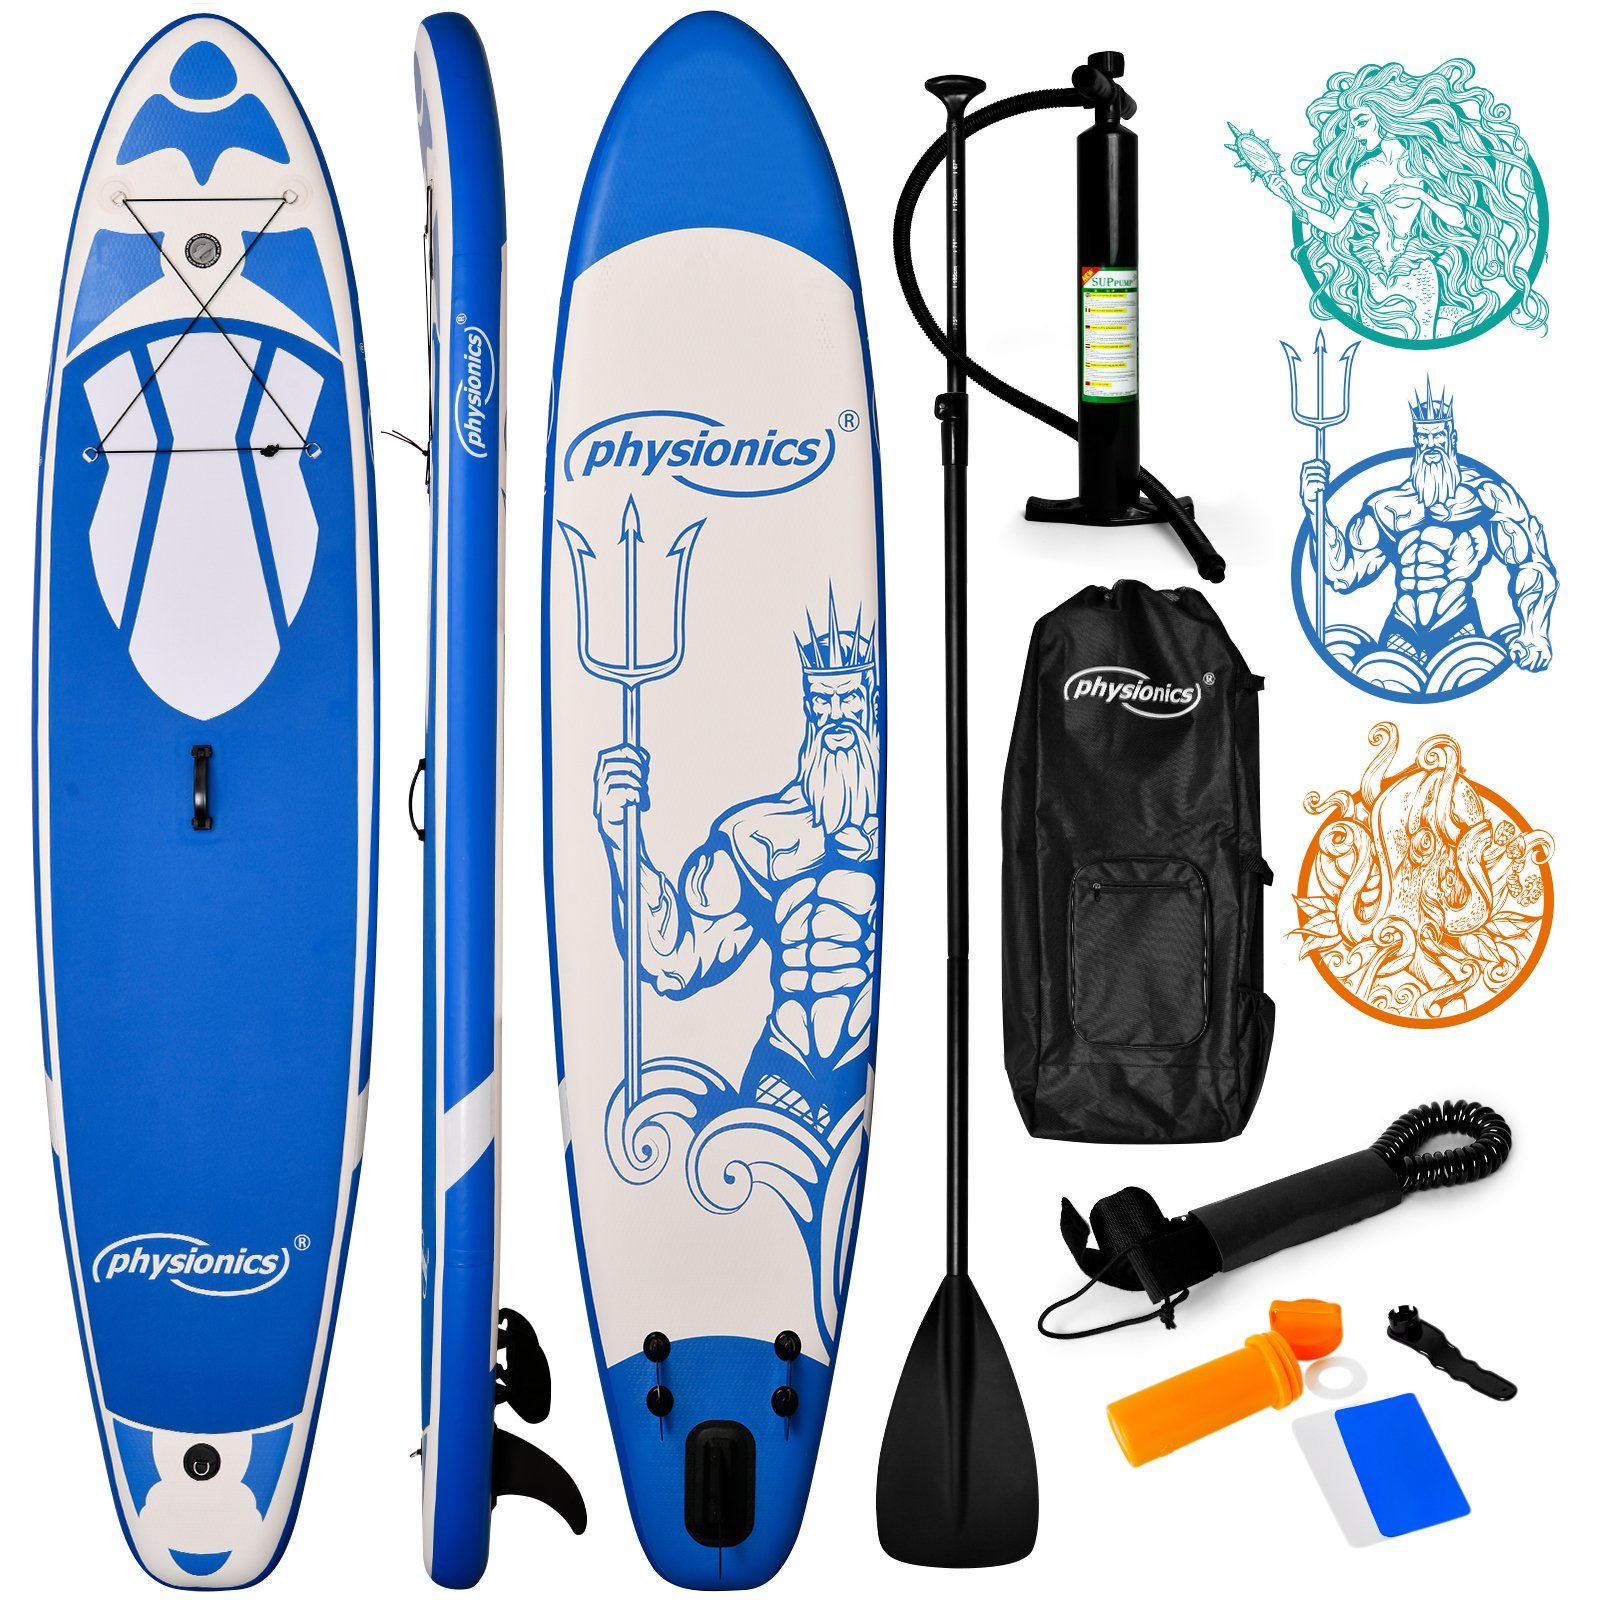 Physionics SUP-Board Stand Up - Pumpe, Paddle Paddel mit Farbwahl und Board 305/320/366cm